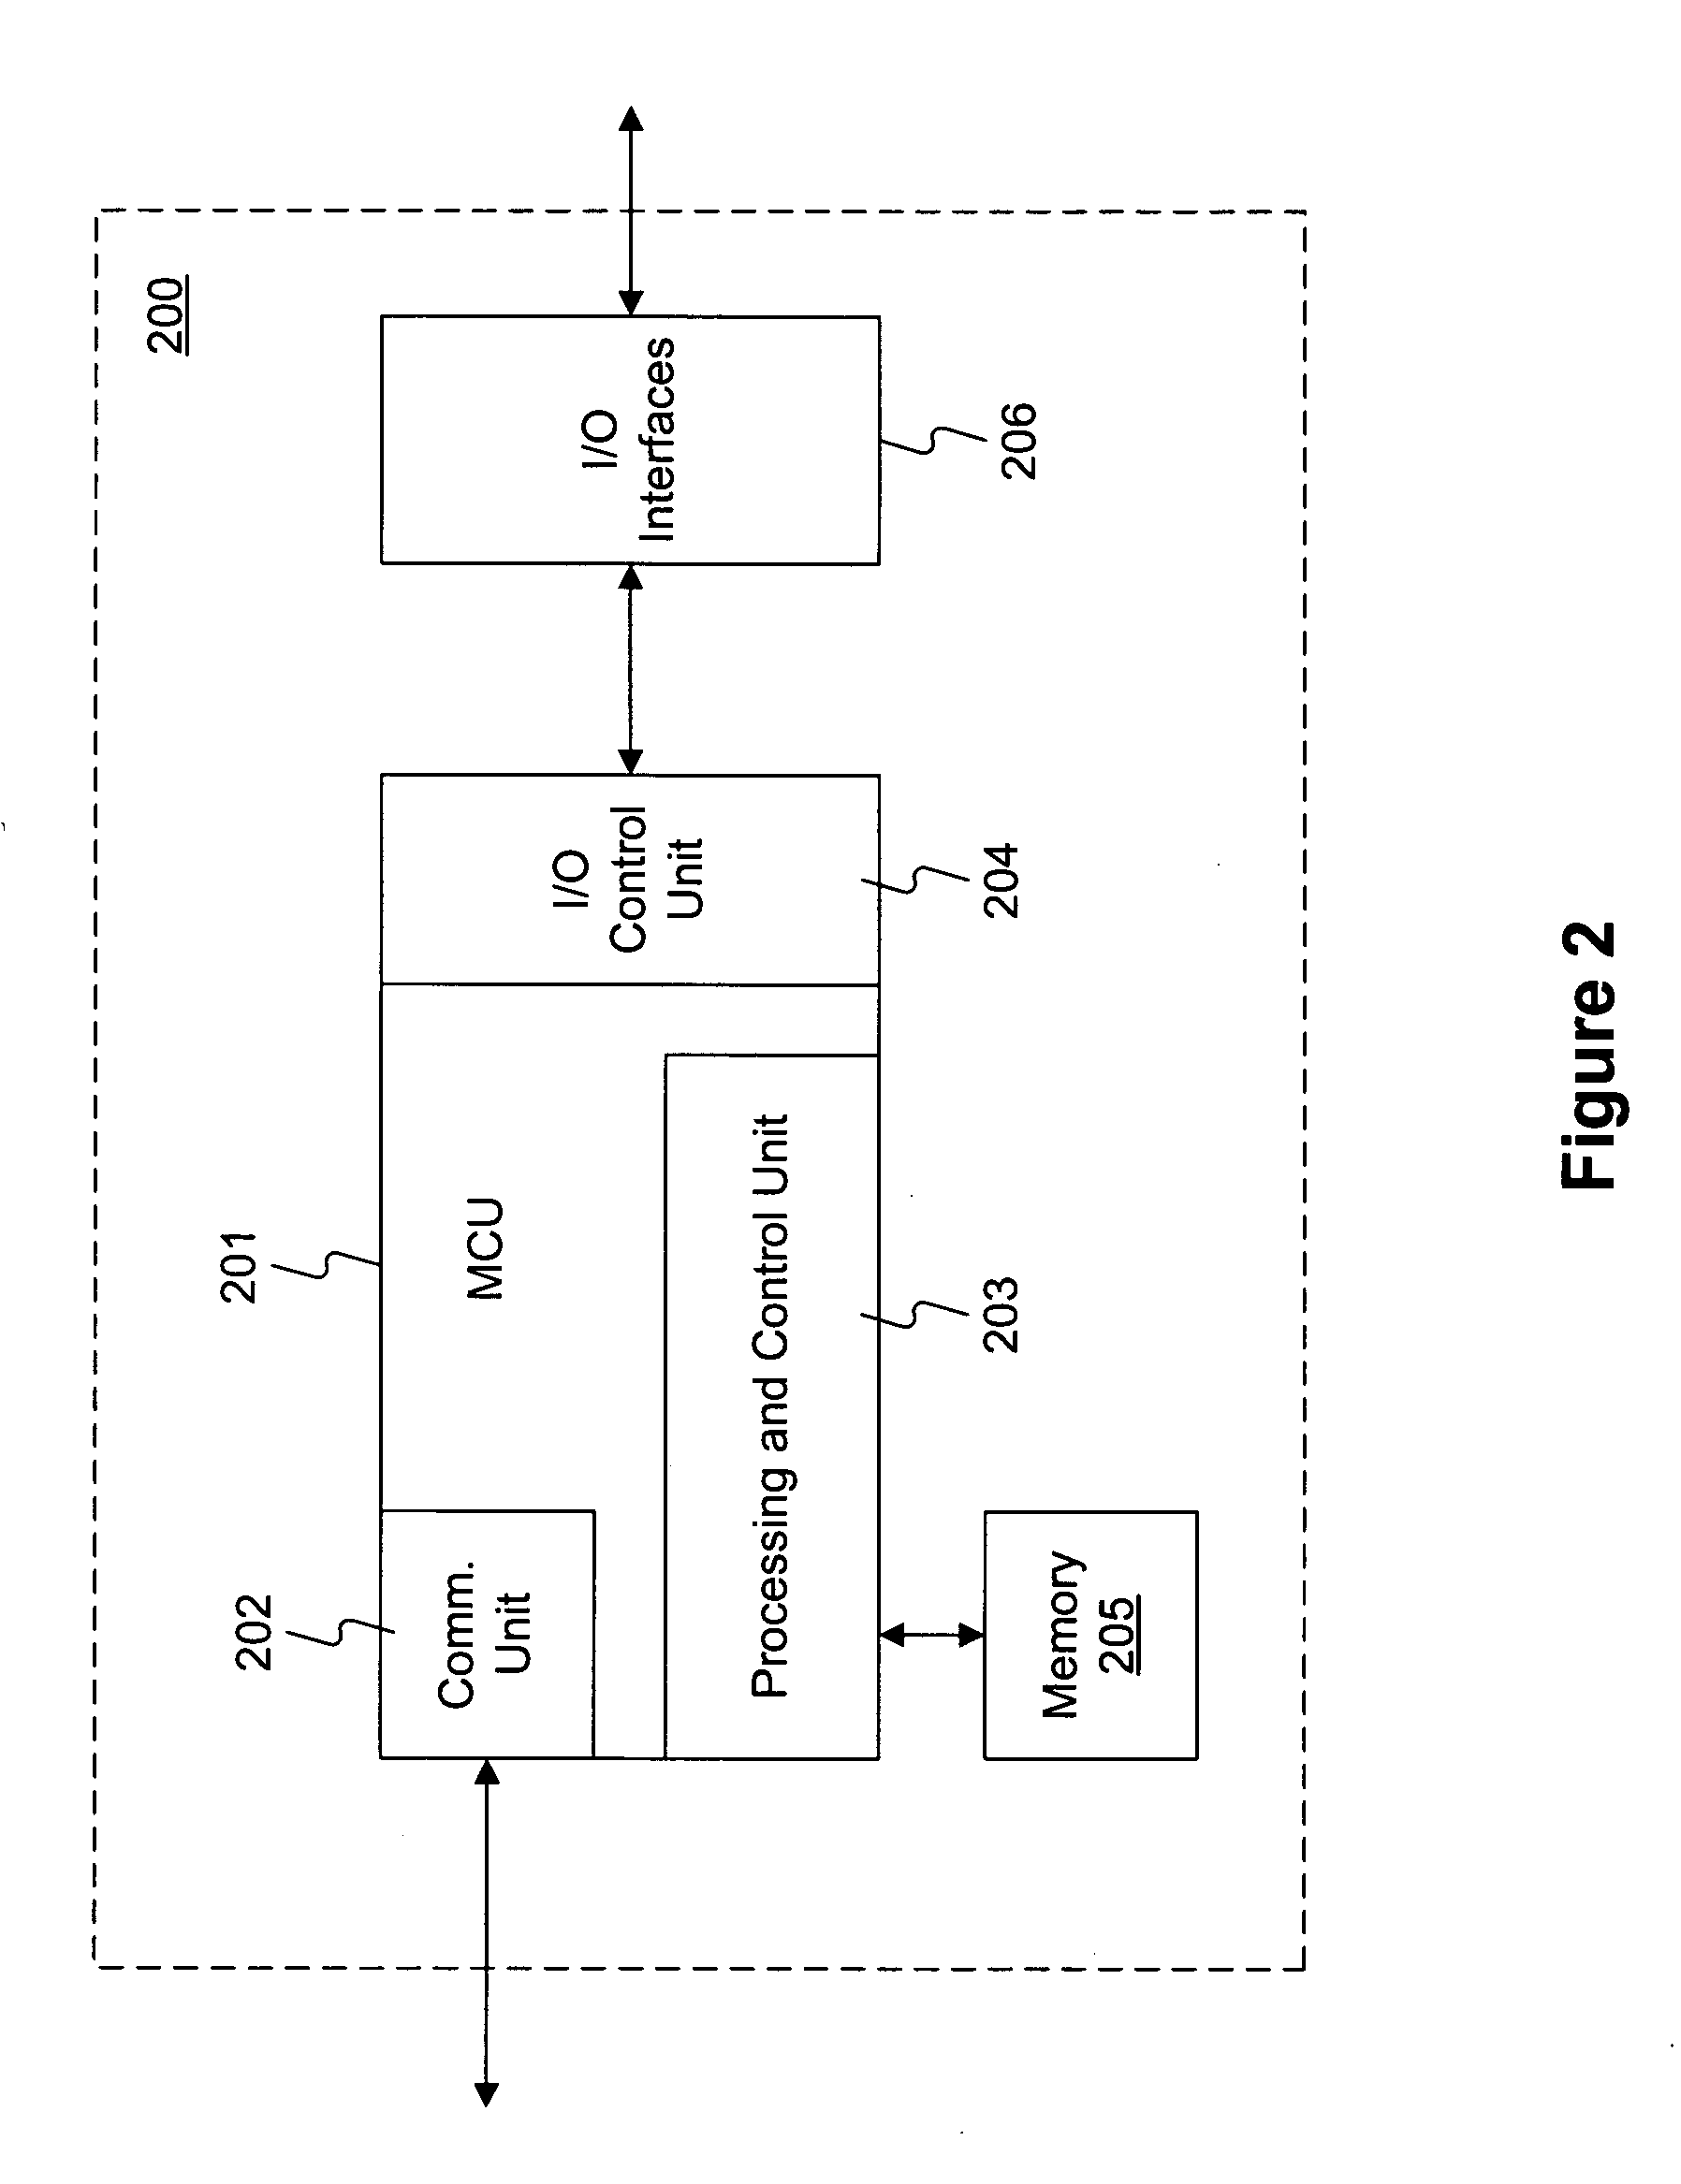 System for fuel cell power plant load following and power regulation